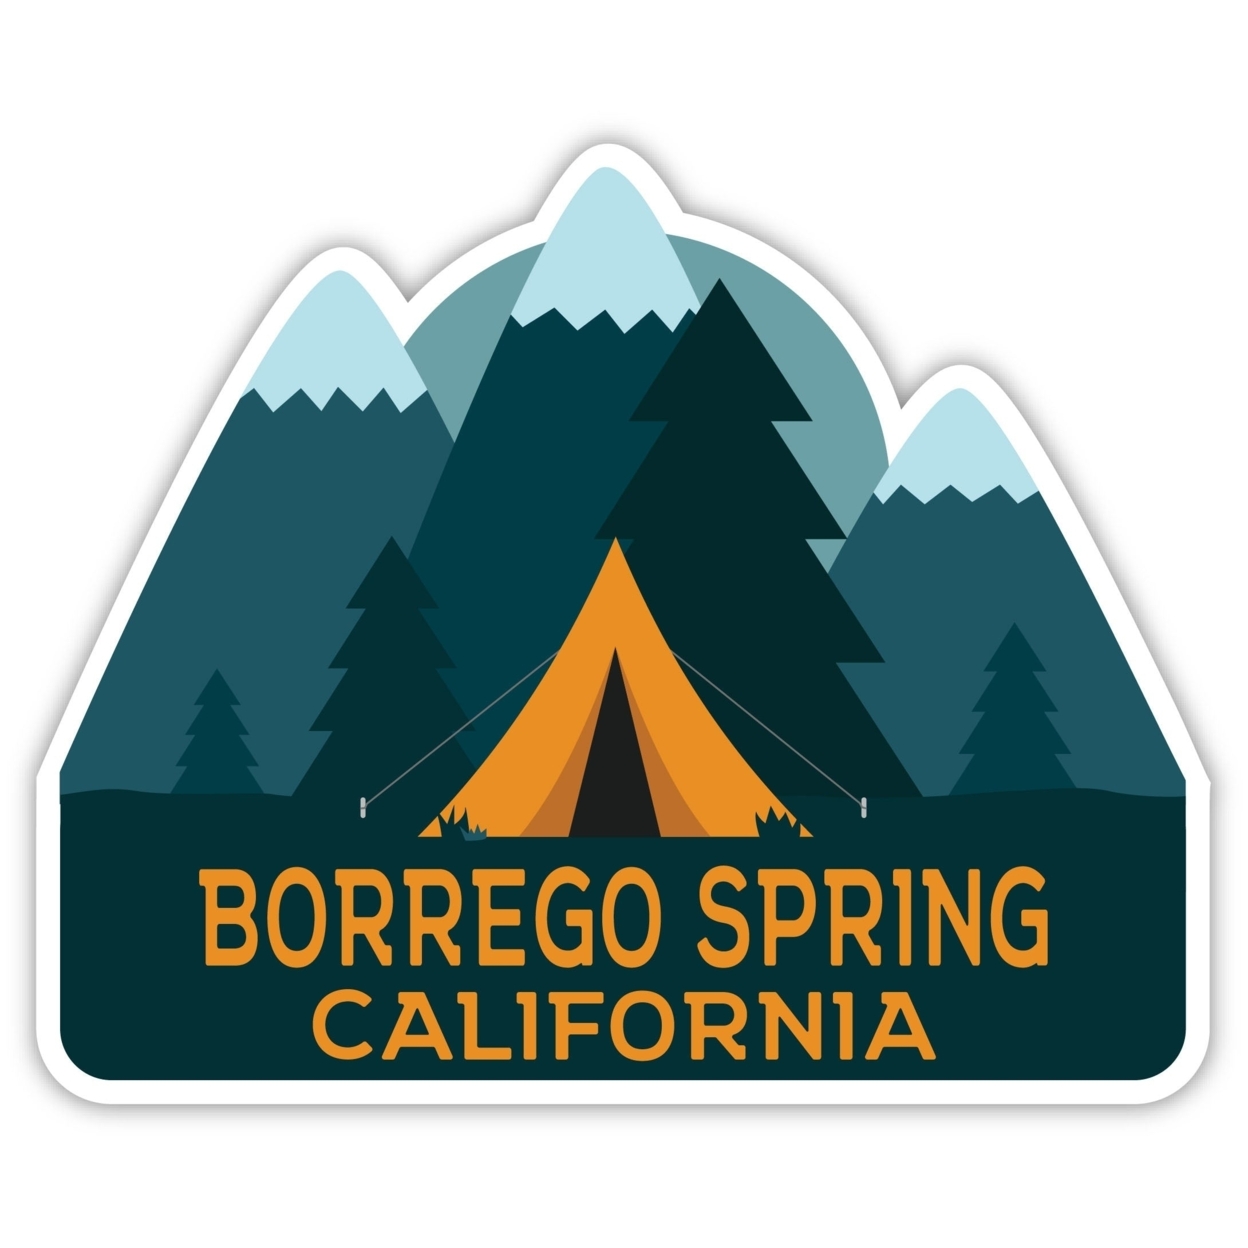 Borrego Spring California Souvenir Decorative Stickers (Choose Theme And Size) - 4-Pack, 12-Inch, Tent